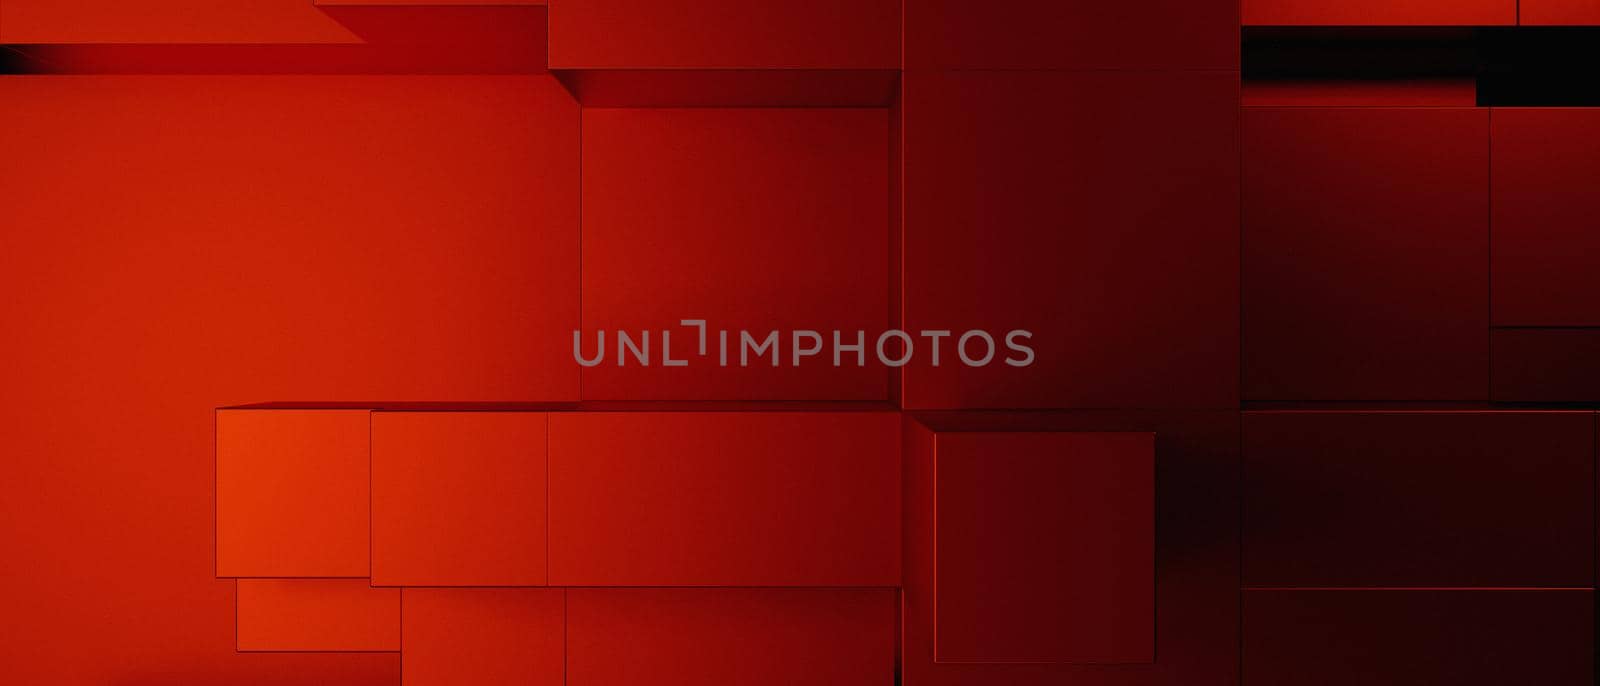 Abstract Elegant 3D Cubes Trendy Futuristic Red Banner Background Wallpaper 3D Illustration by yay_lmrb